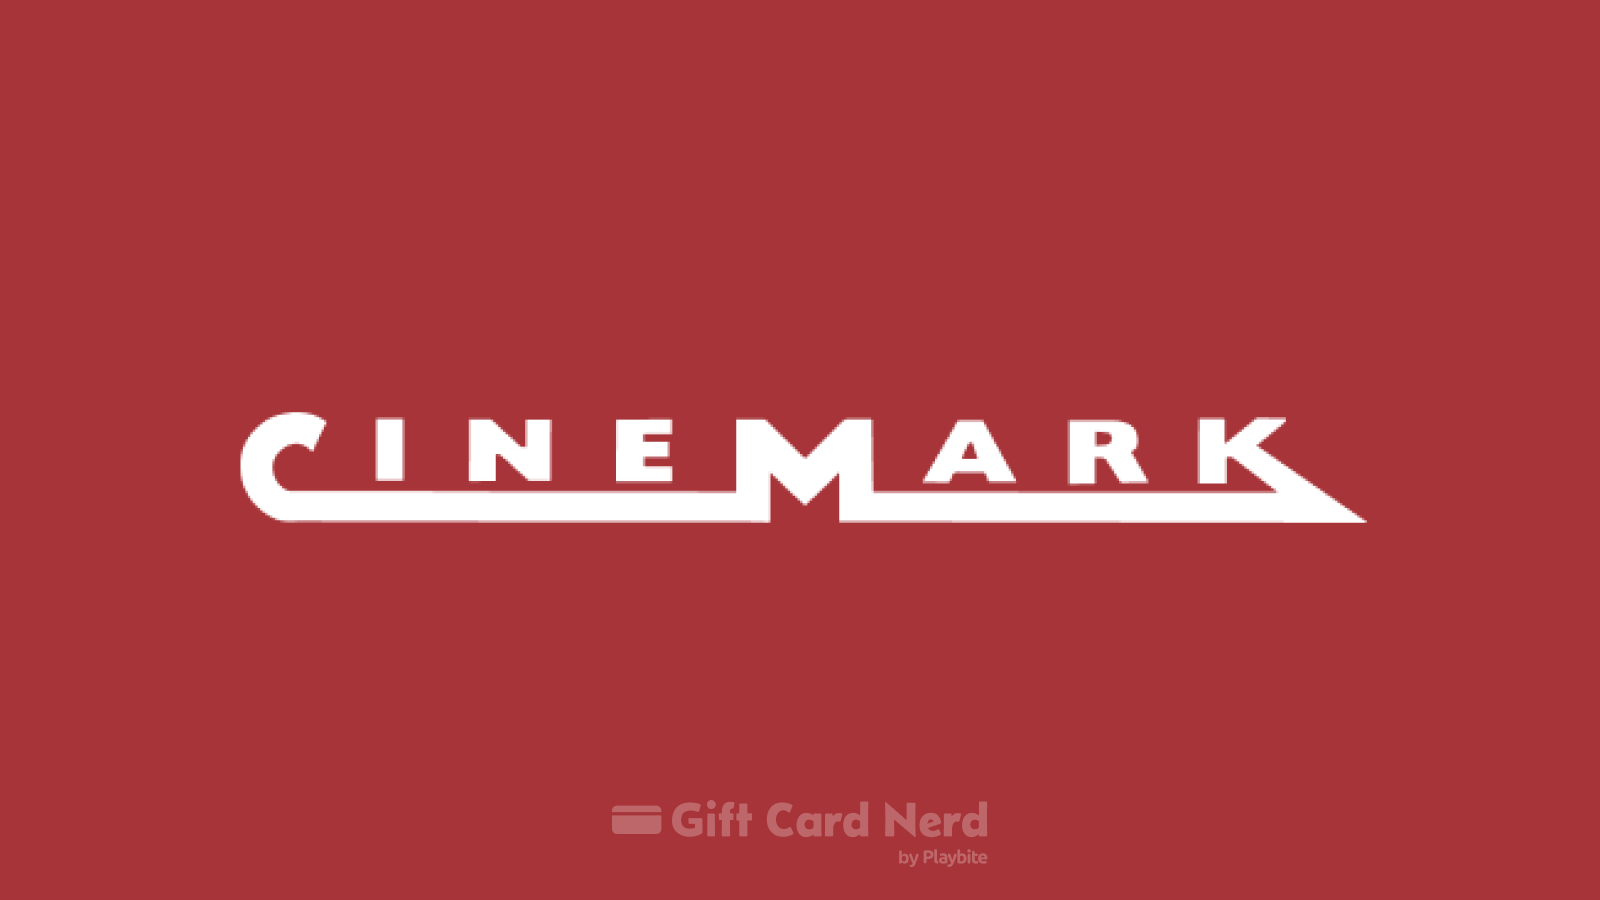 Can You Find Cinemark Gift Cards at Walgreens?